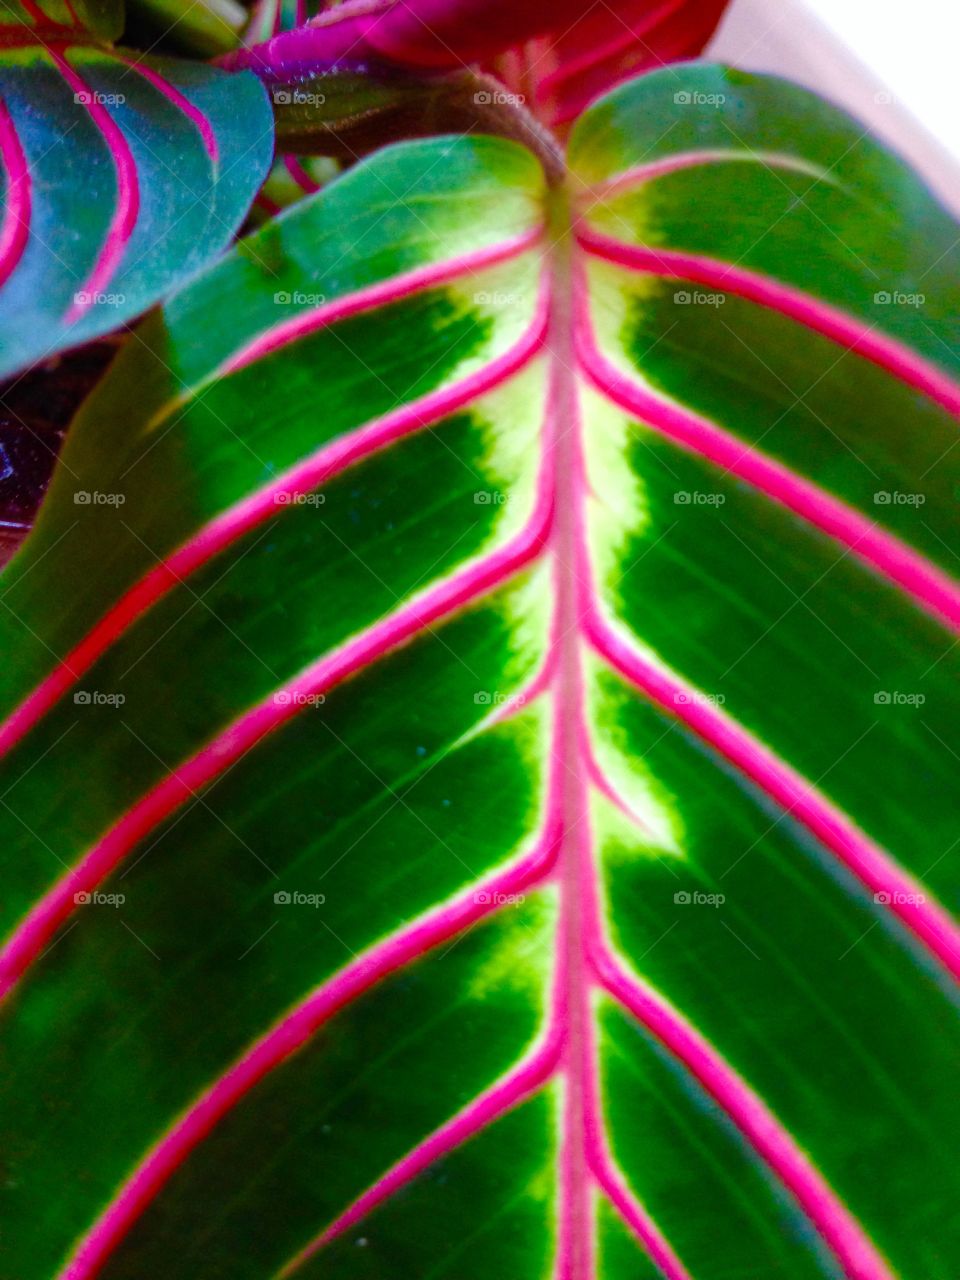 Flower. Close up of a colorful leaf